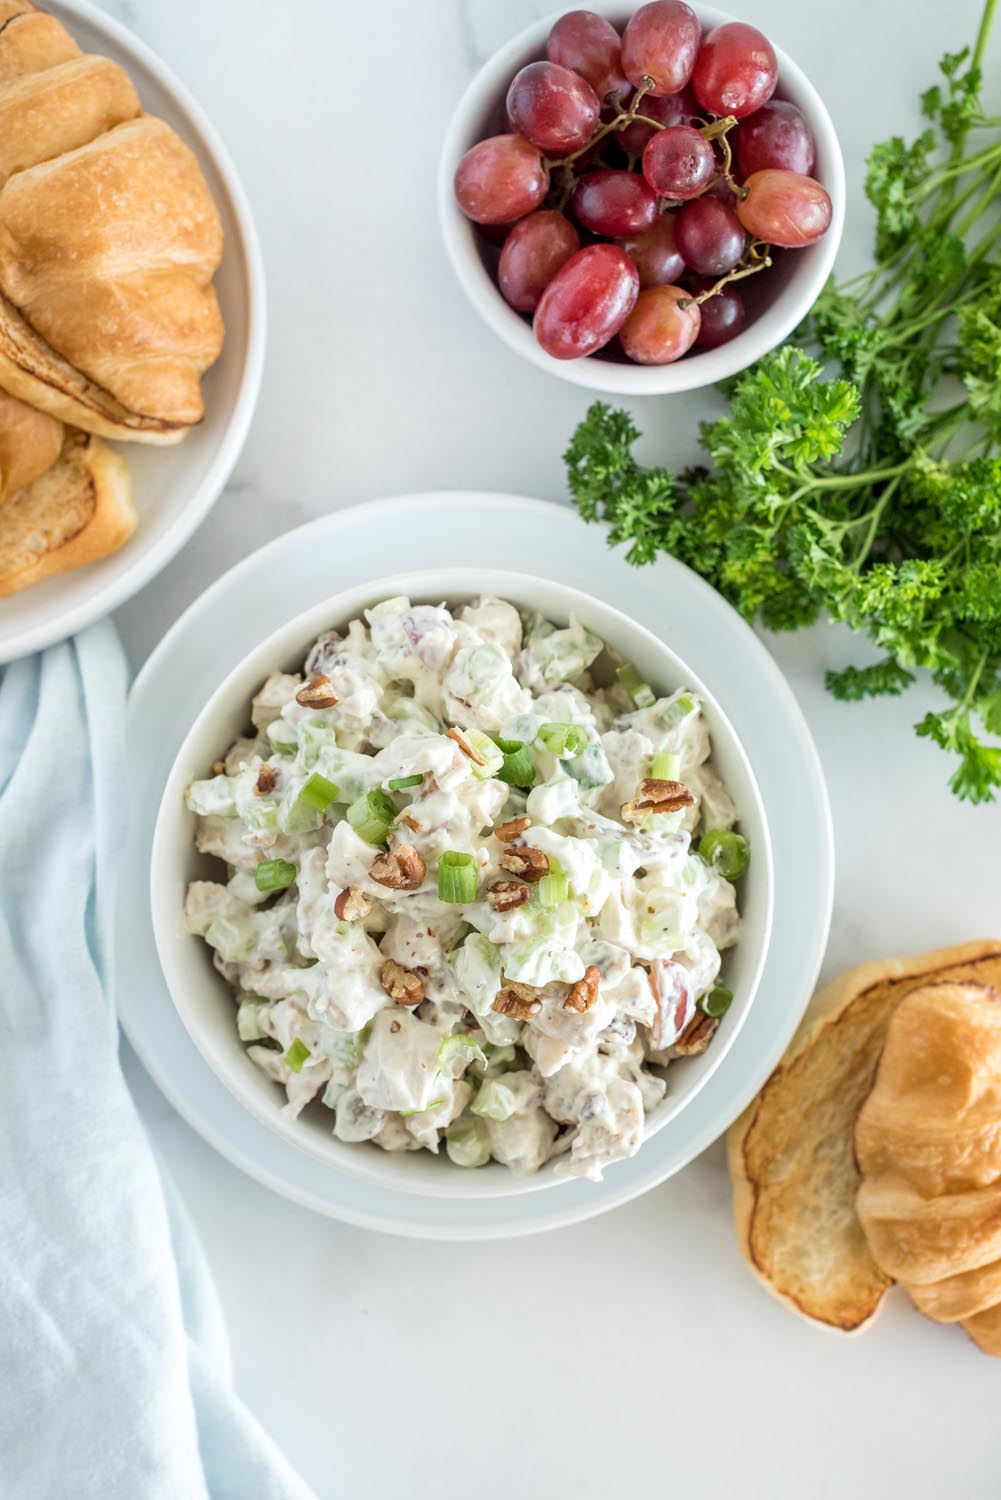 Overhead picture of a bowl of chicken salad mix, with a bowl of grapes, croissants, and fresh parsley in the background.